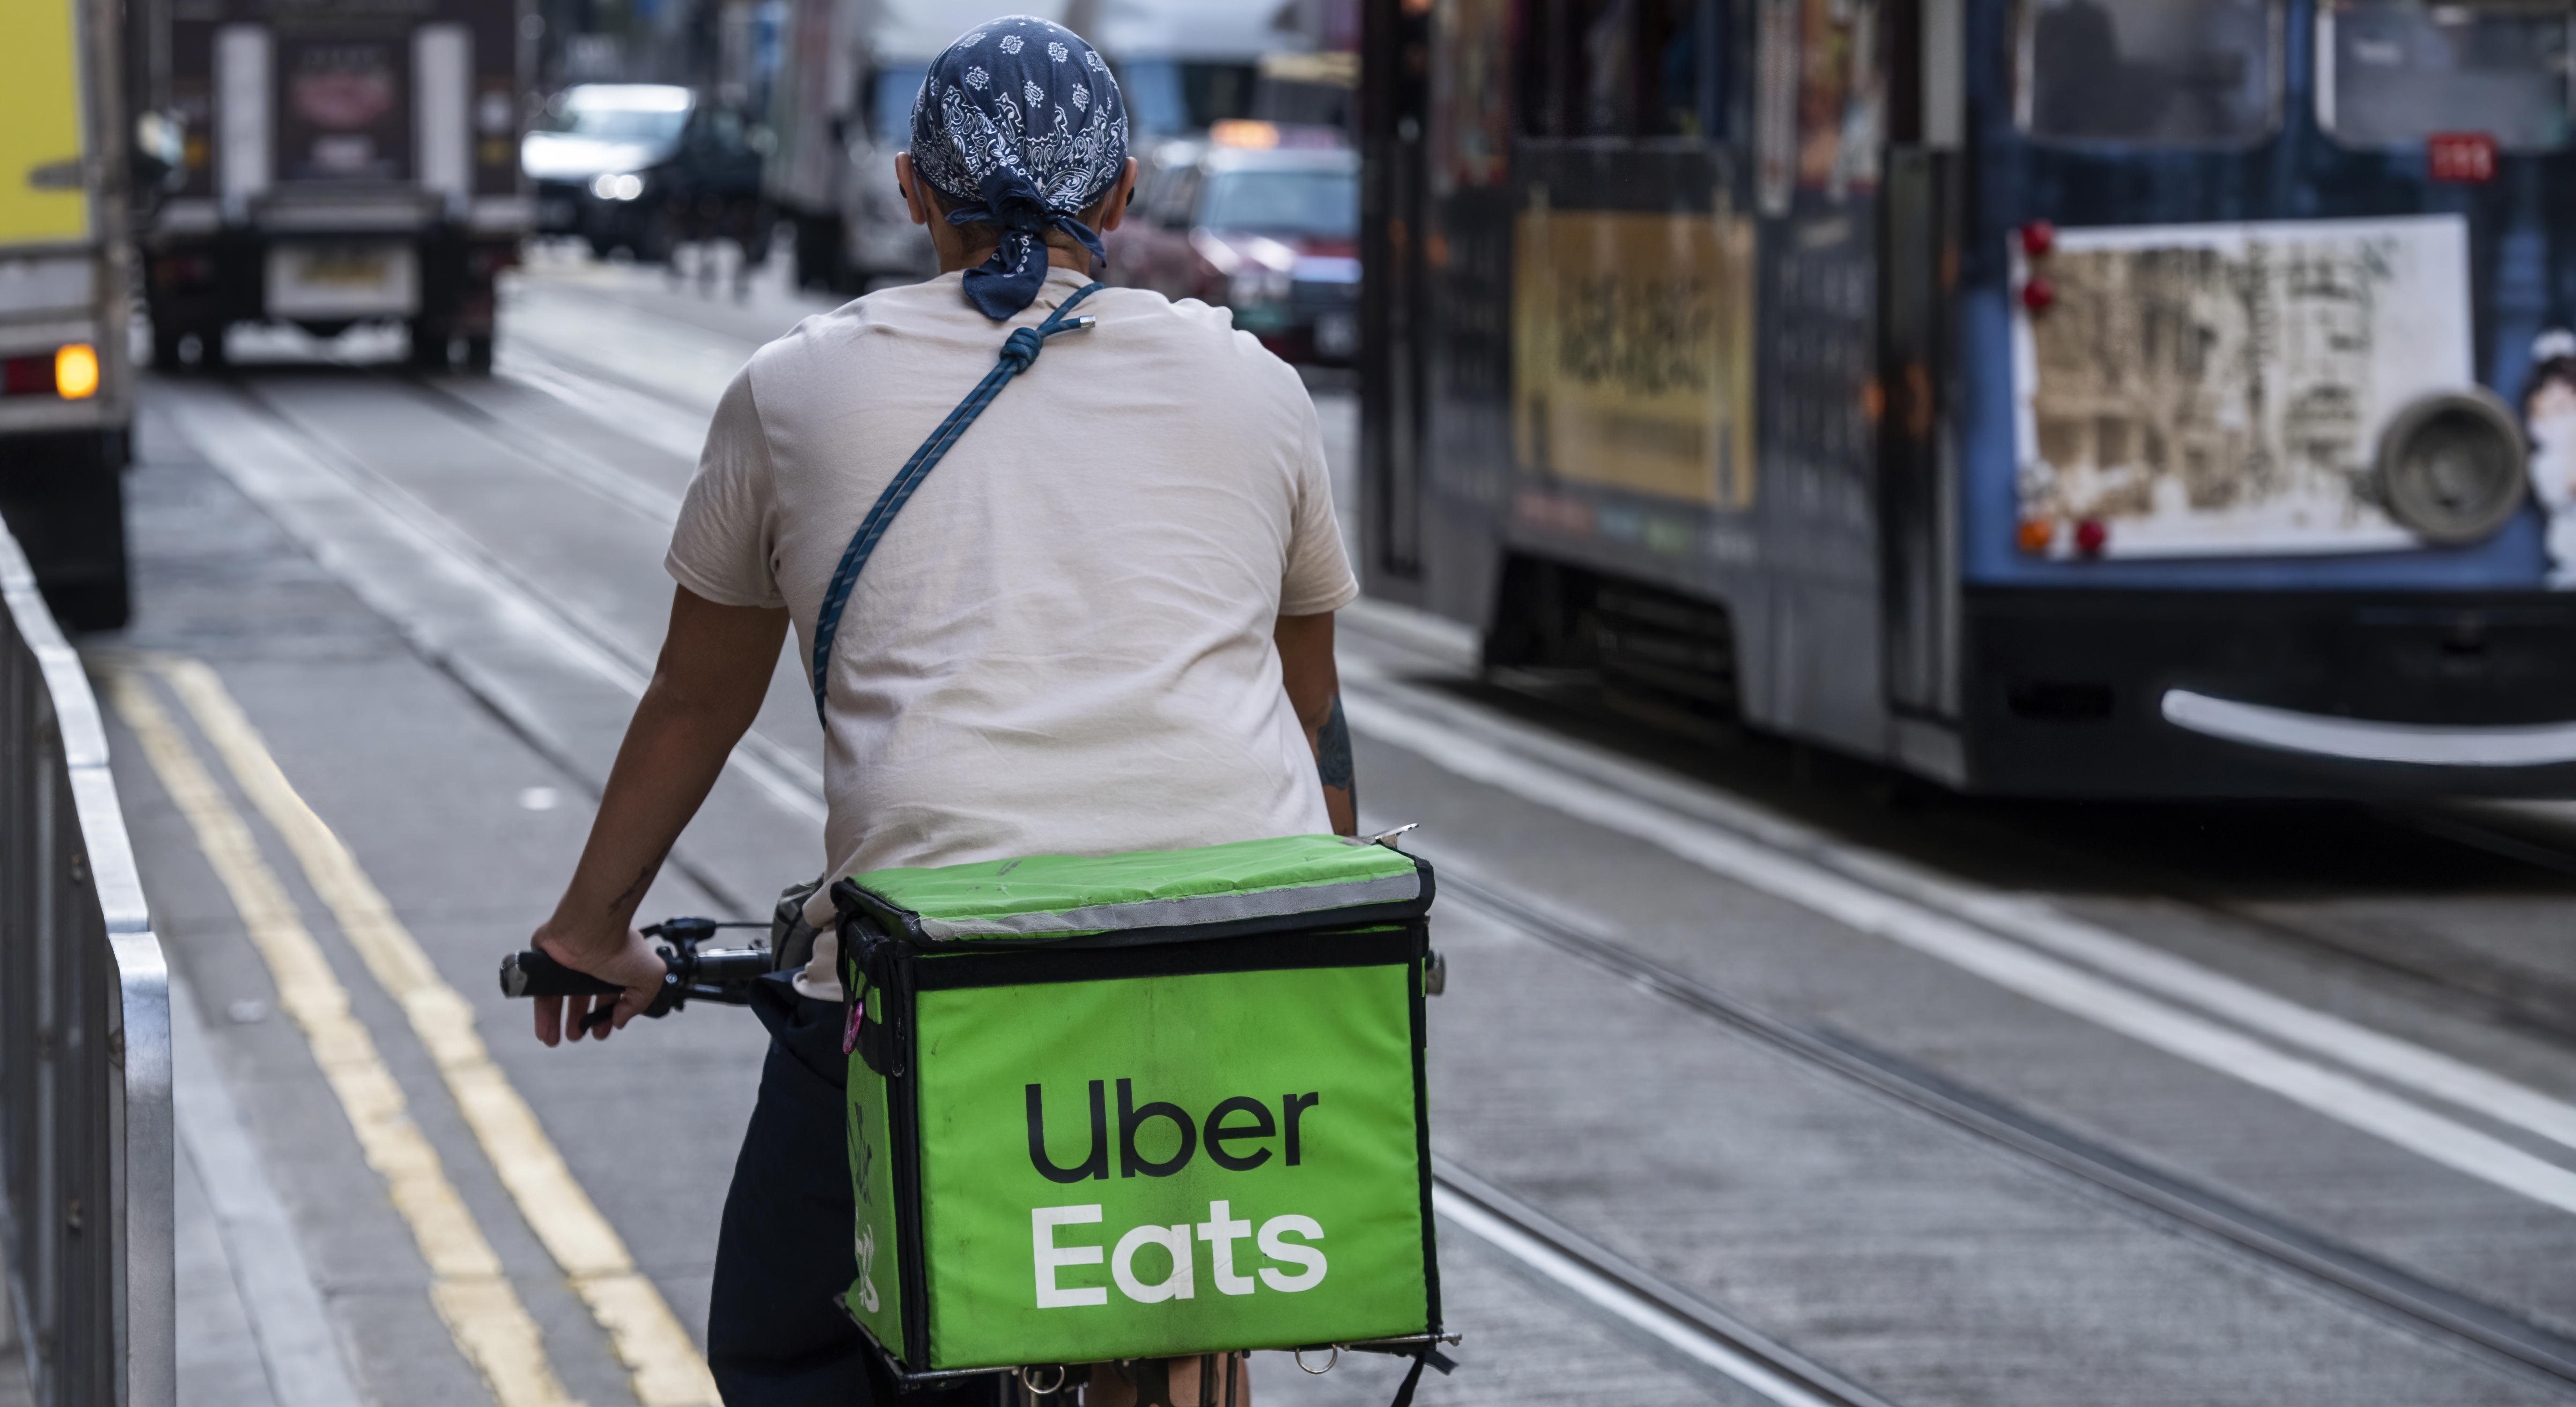 A delivery worker from the delivery take out food company Uber Eats is seen riding on a bicycle in Hong Kong